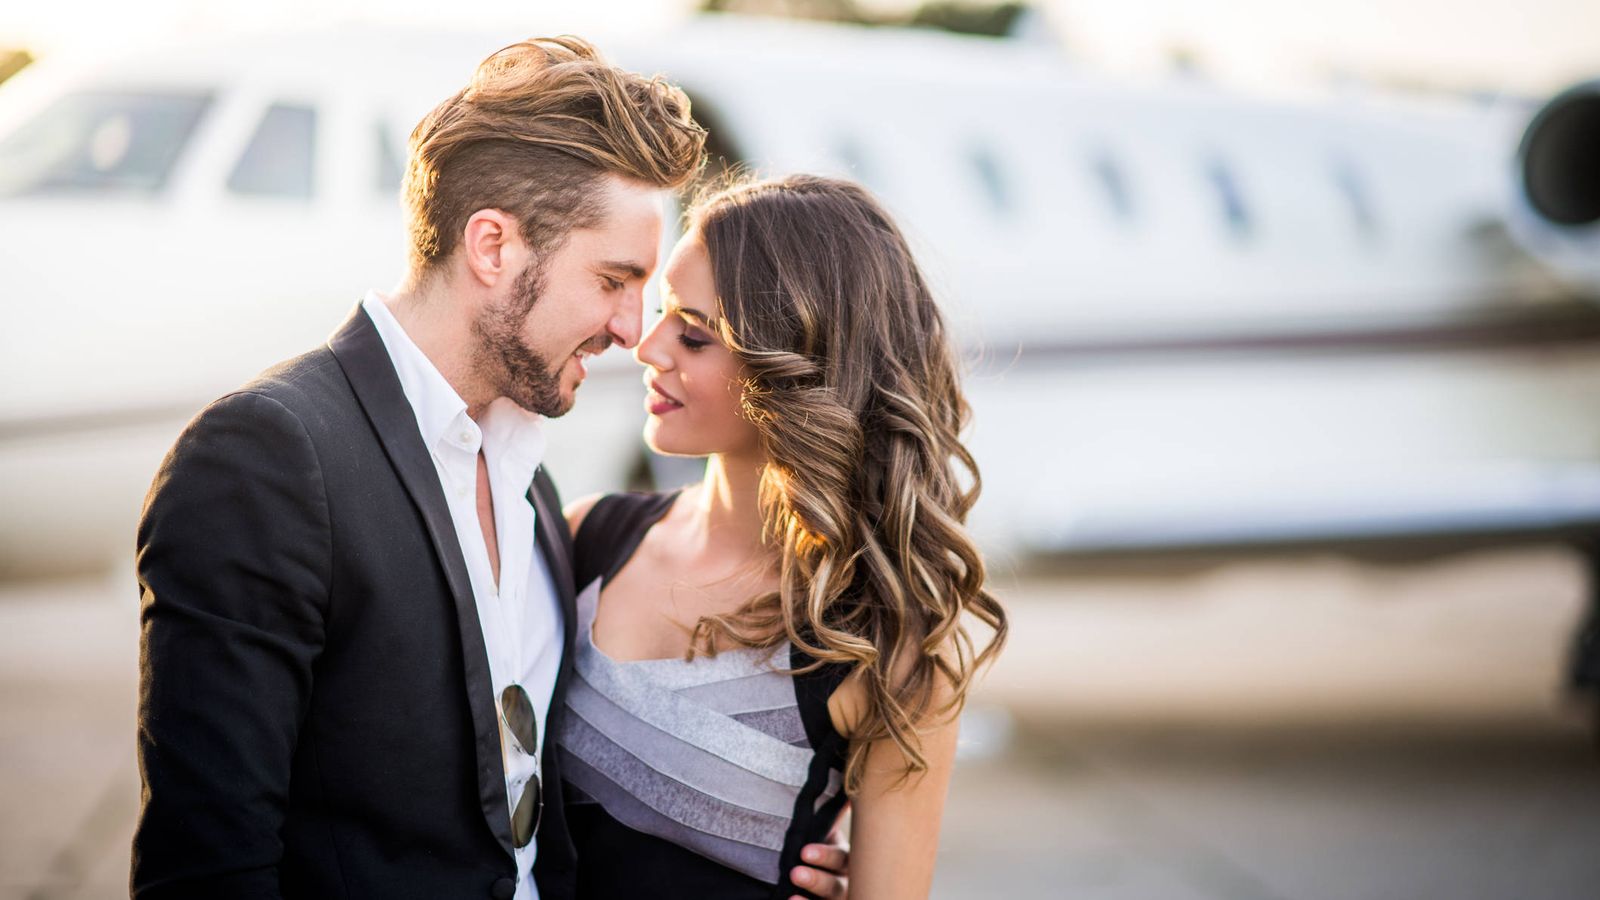 Foto: Love is in the air. (iStock)